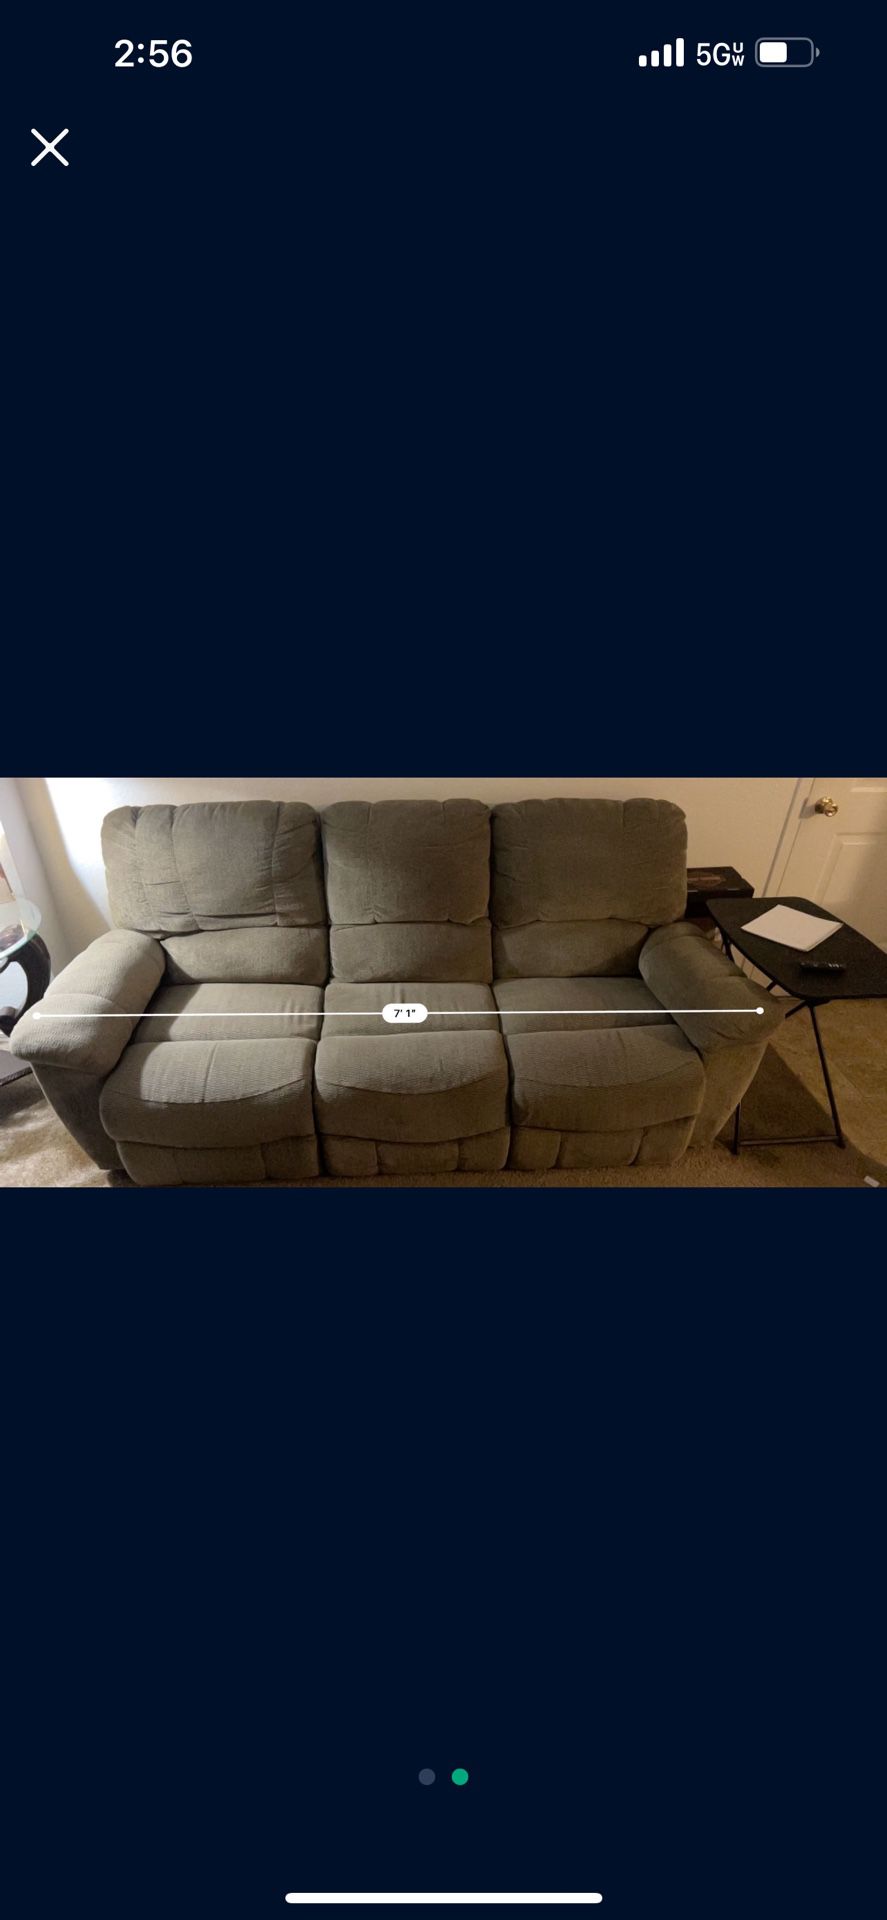 Lazy Boy Recliner Couch